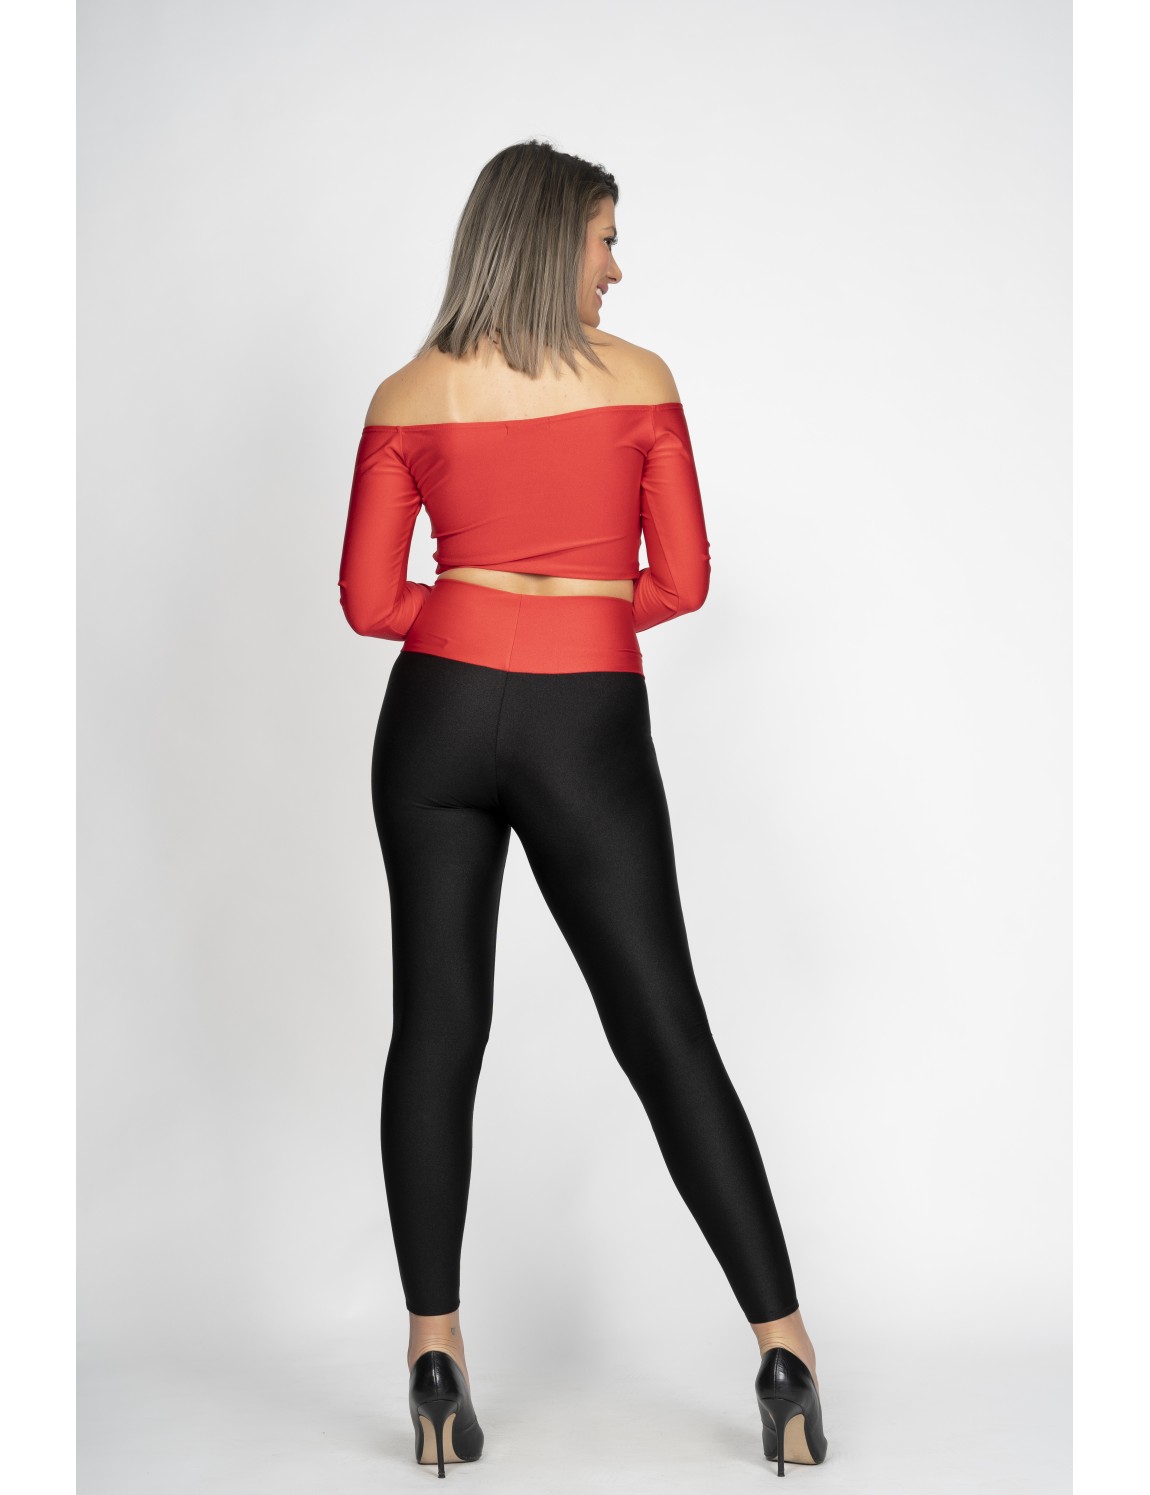 Exclusive lycra legging Paris model special for night and dance.